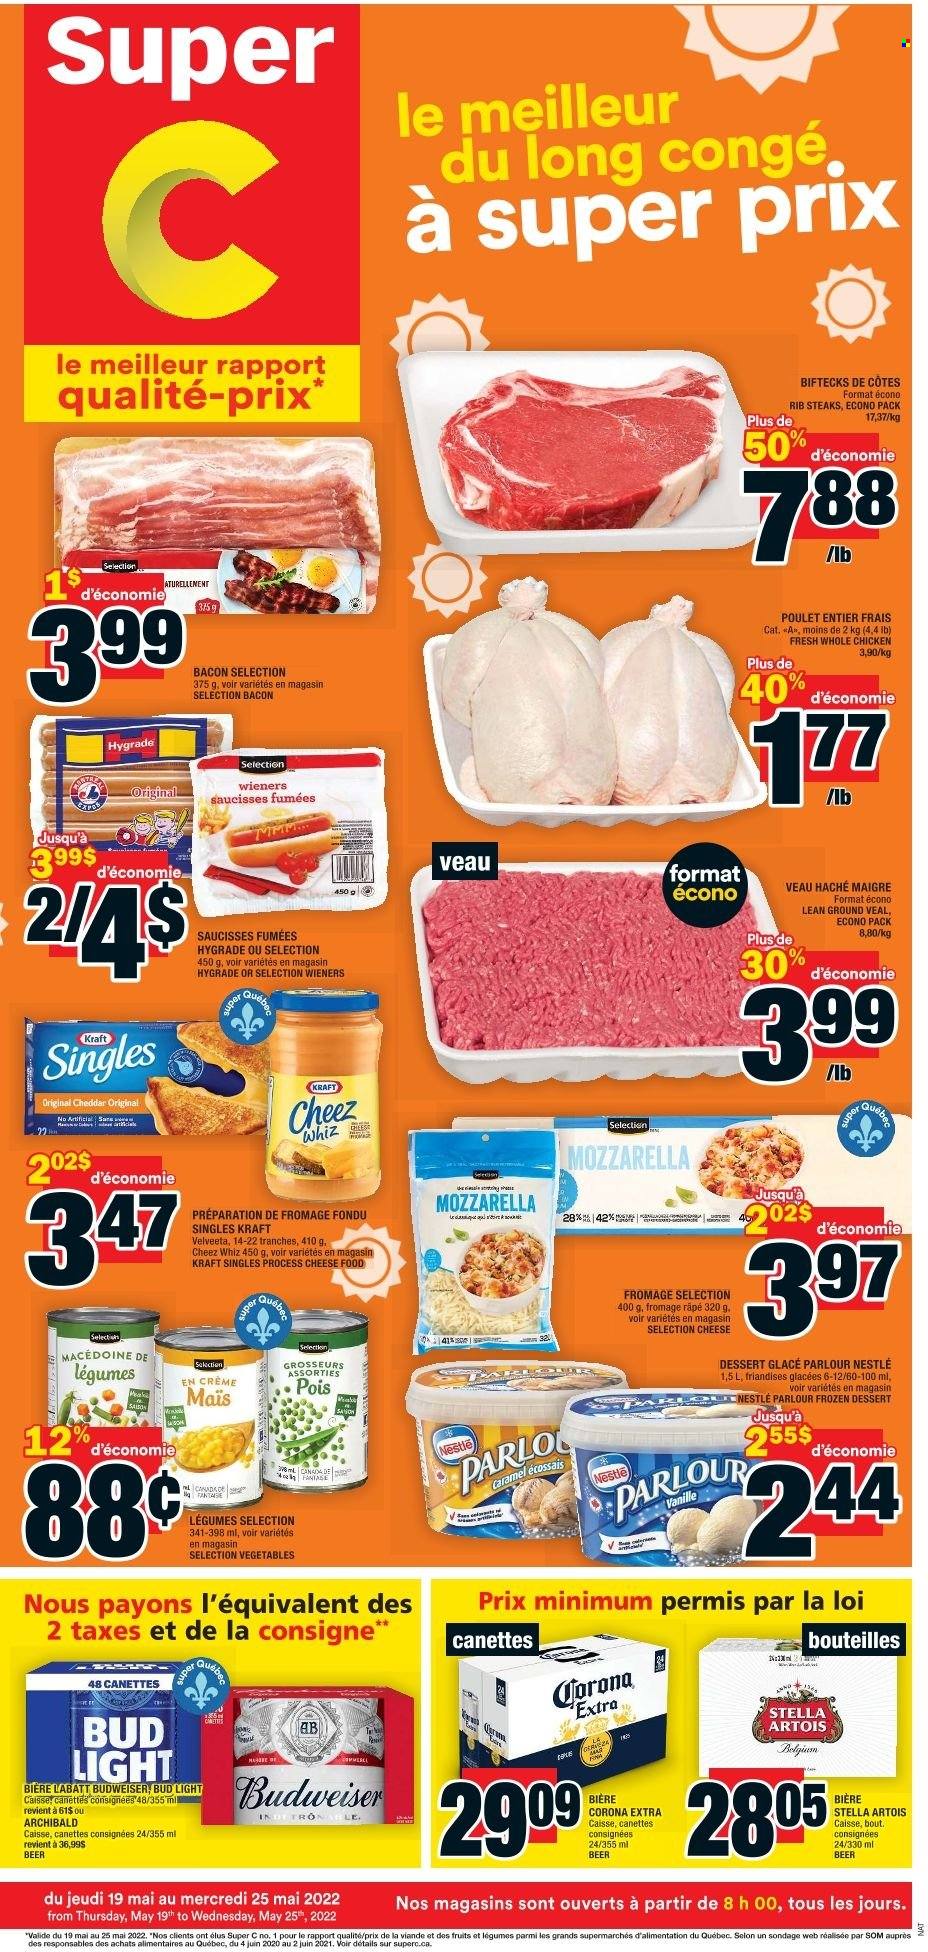 thumbnail - Super C Flyer - May 19, 2022 - May 25, 2022 - Sales products - Kraft®, bacon, sandwich slices, cheddar, cheese, Kraft Singles, caramel, beer, Bud Light, Corona Extra, whole chicken, chicken, ground veal, veal meat, Budweiser, mozzarella, Nestlé, Stella Artois, steak. Page 1.